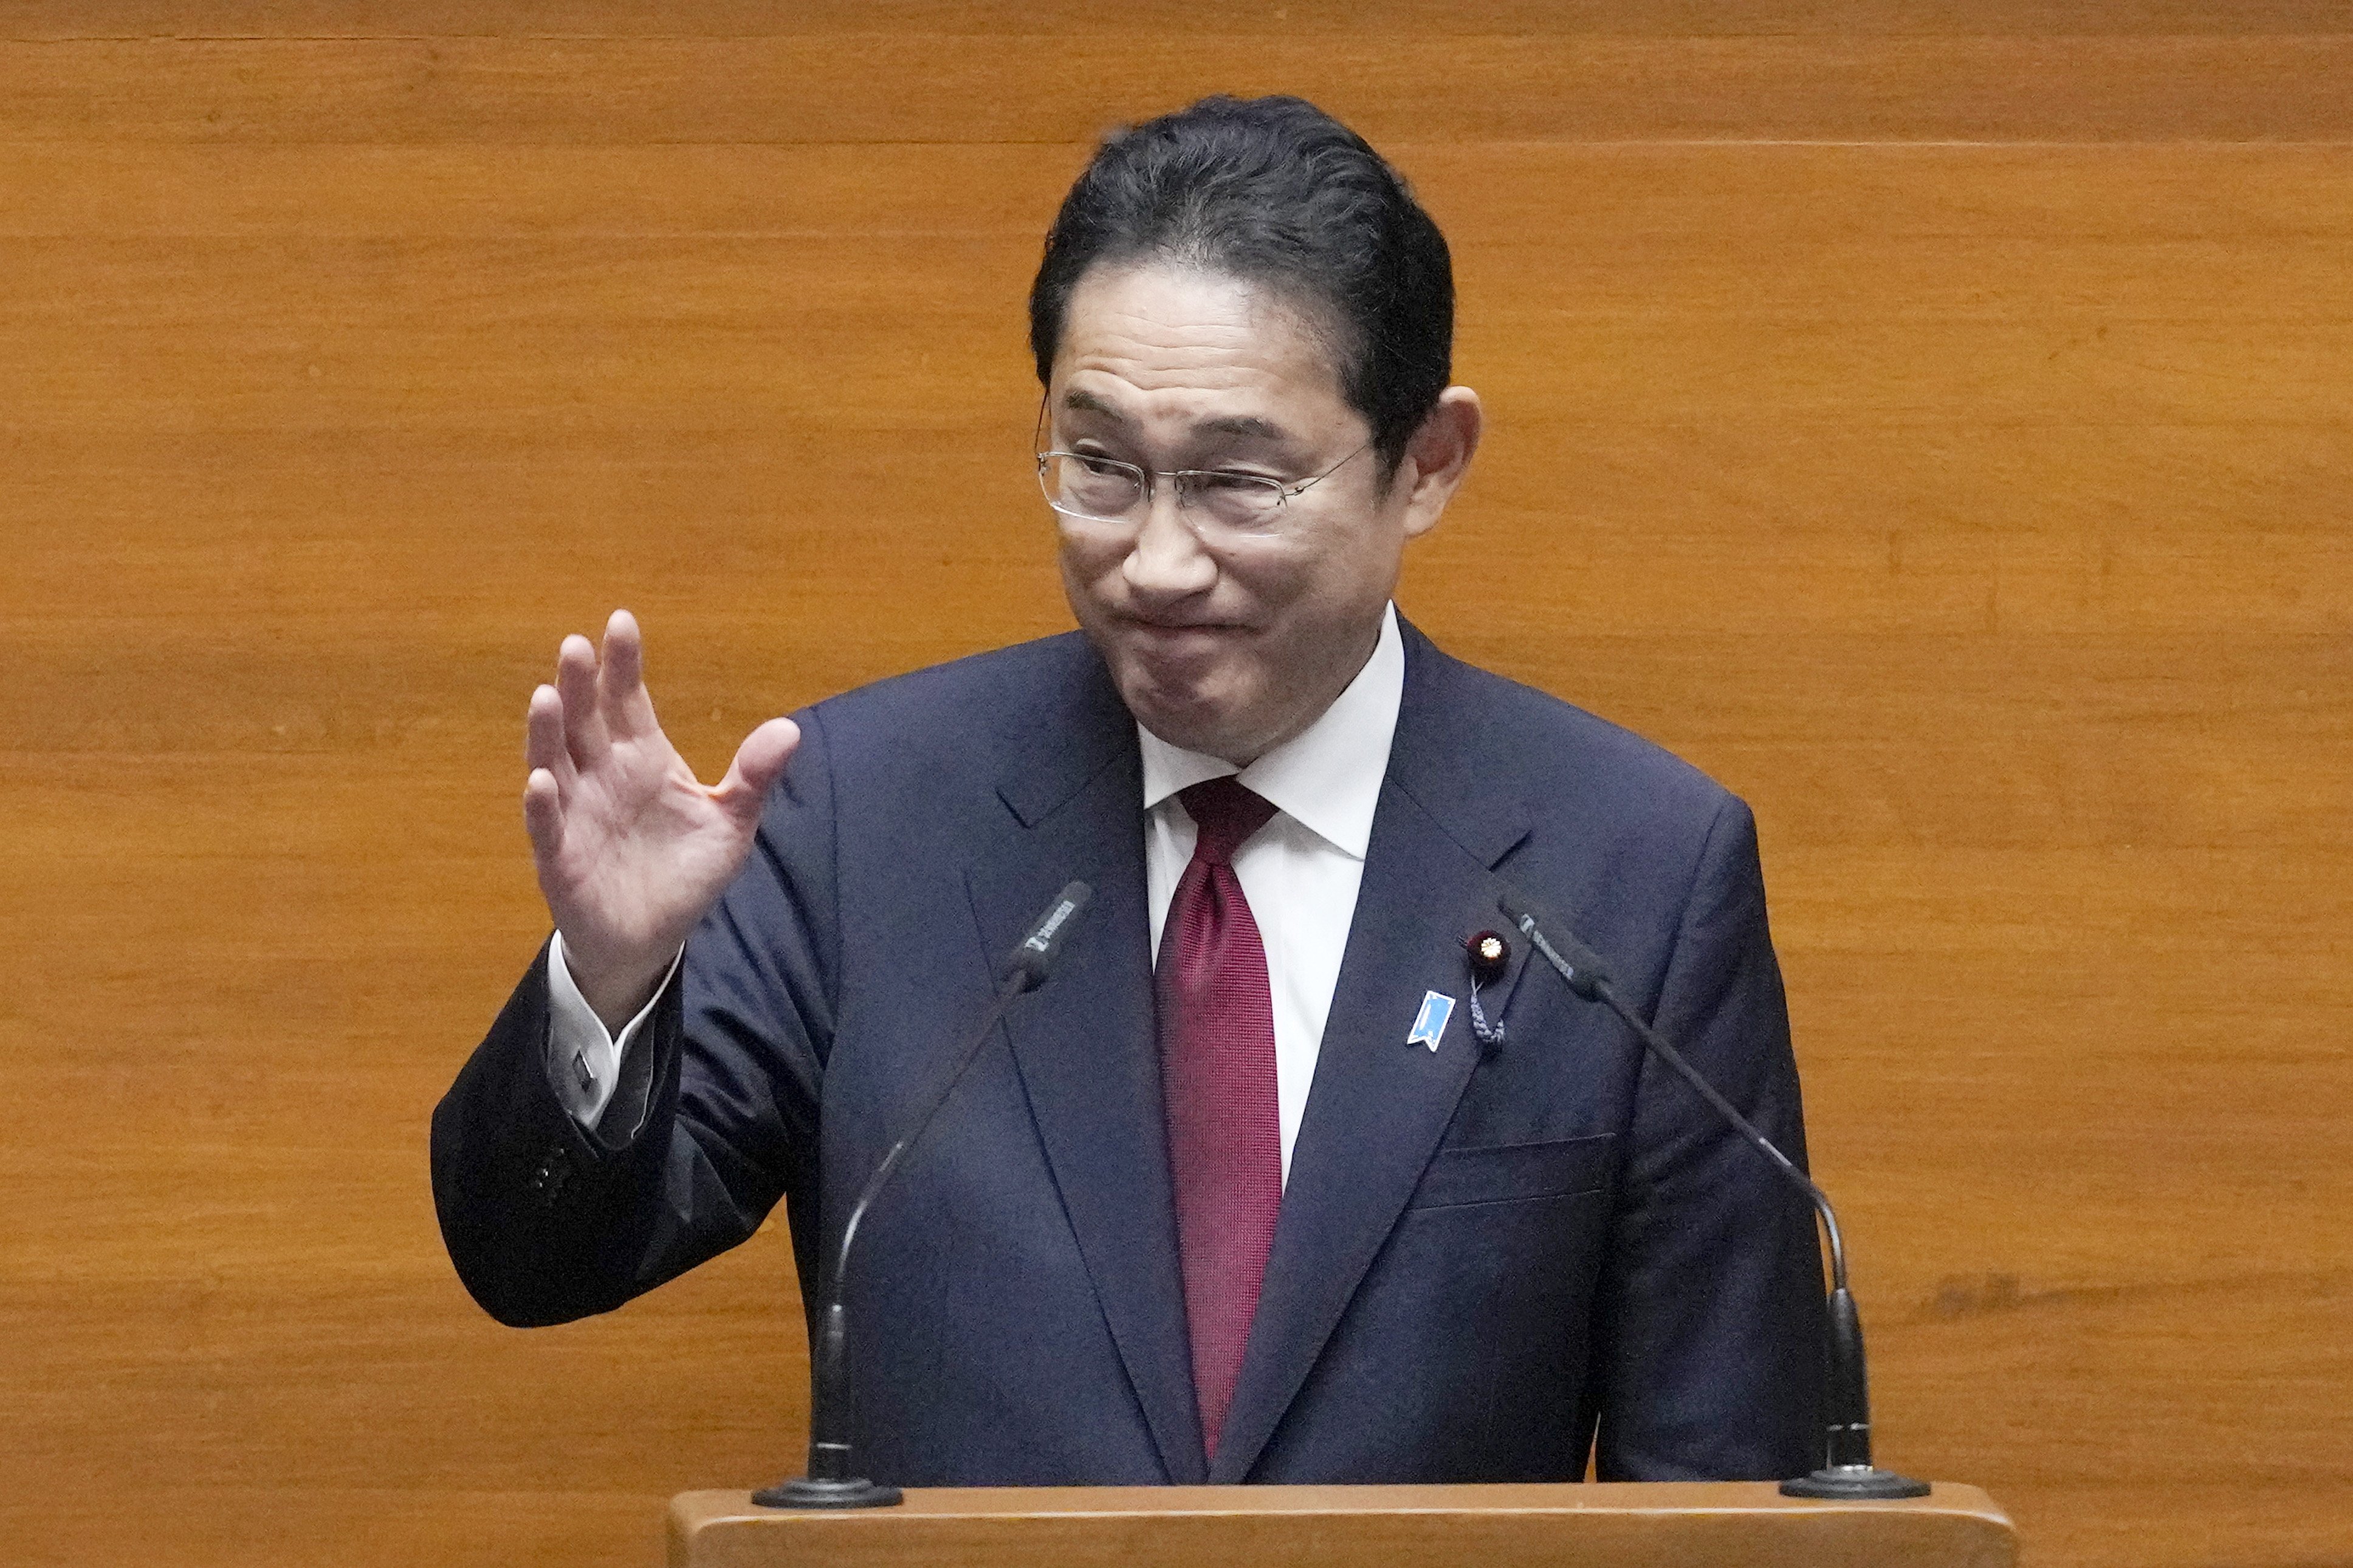 Japanese Prime Minister Fumio Kishida speaks during a joint session of Congress for a series of bilateral meetings to further enhance the partnership between the Philippines and Japan. Photo: EPA-EFE/Pool